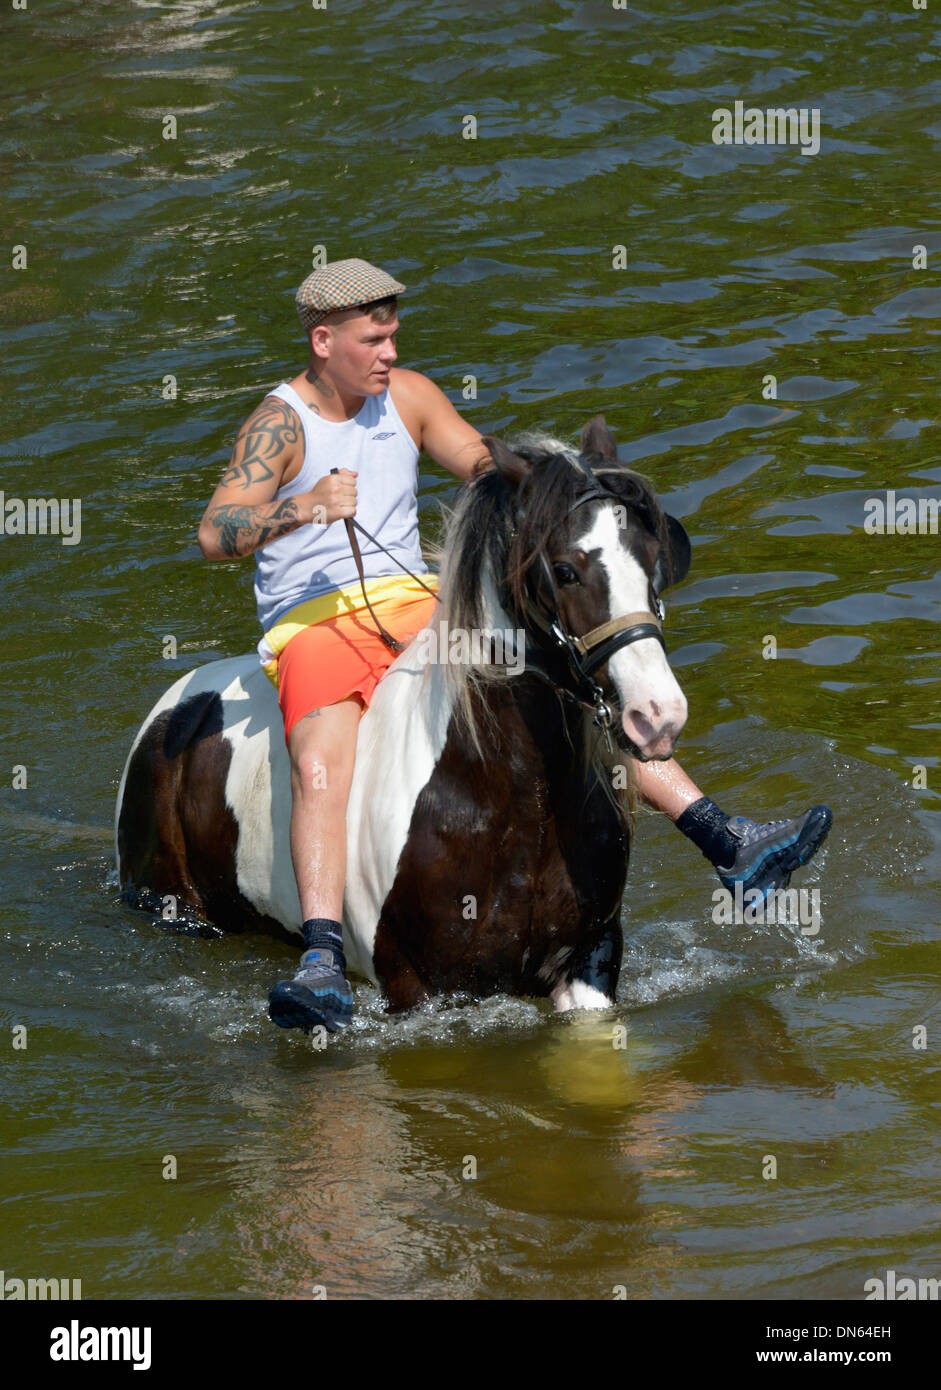 Gypsy traveller riding horse in River Eden. Appleby Horse Fair, Appleby-in-Westmorland, Cumbria, England, United Kingdom, Europe Stock Photo